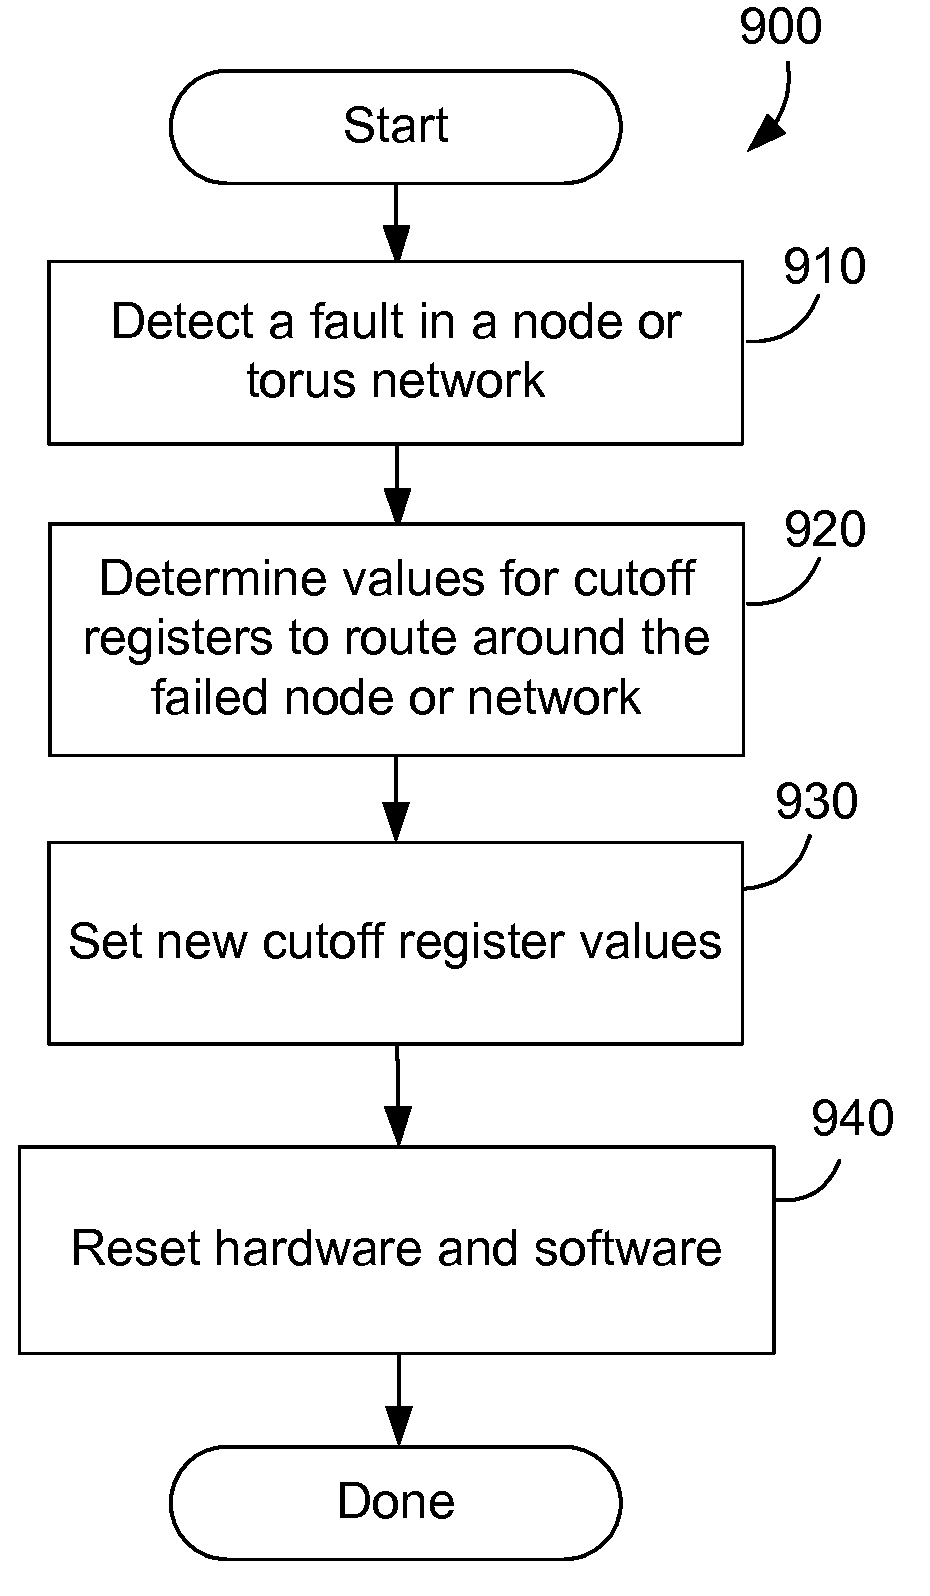 Fault recovery on a parallel computer system with a torus network